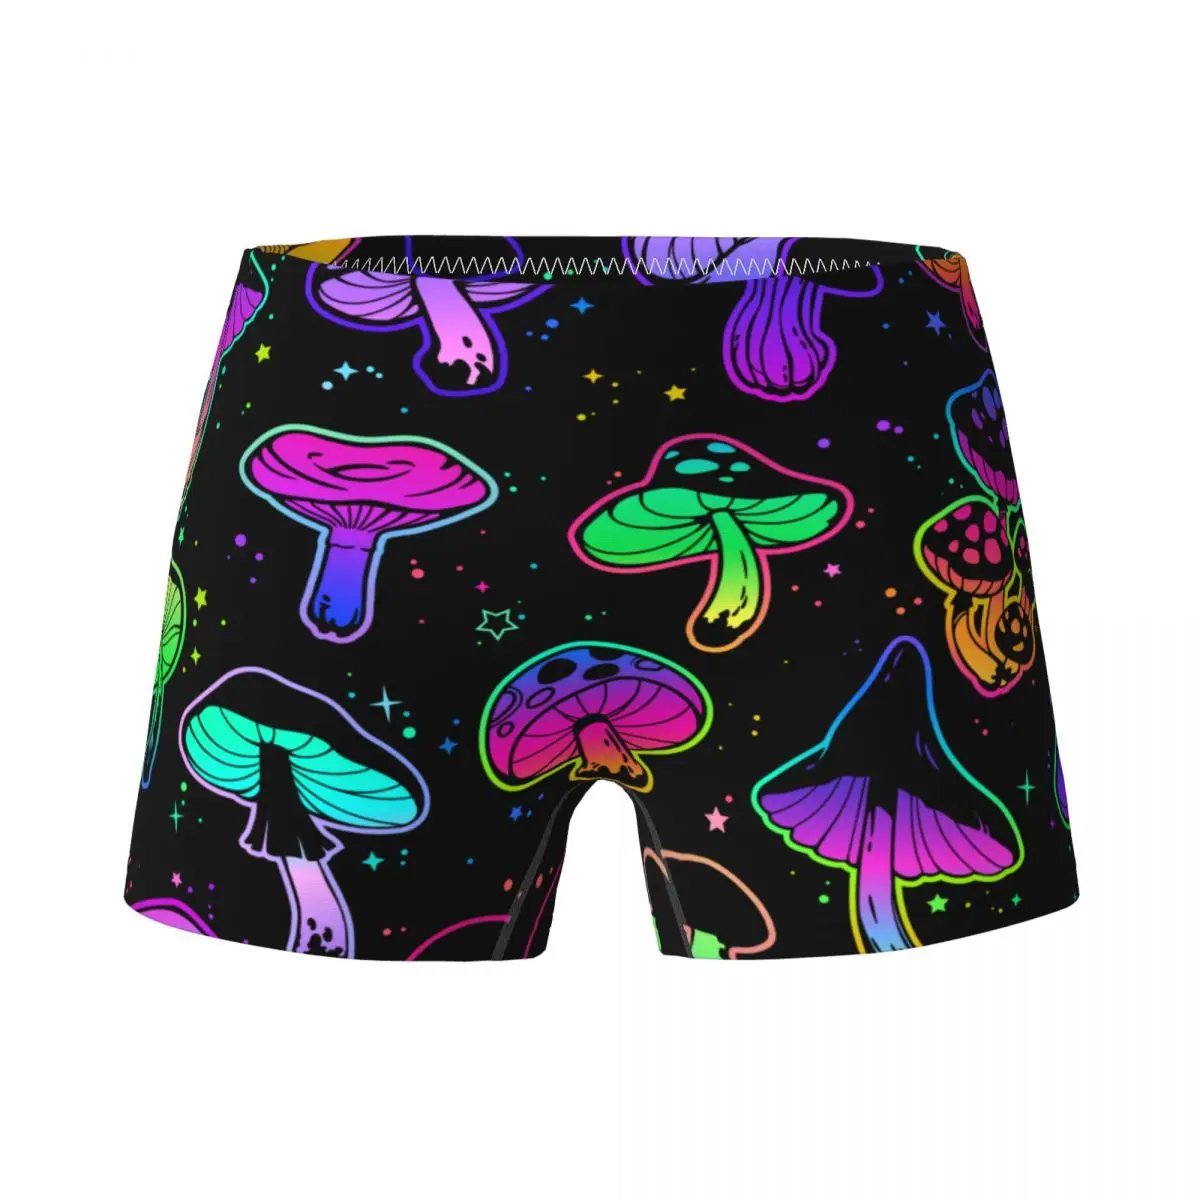 

Bright Psychedelic Mushrooms Child Girl Underwear Kids Boxers Shorts Cotton Teenagers Panties Underpants Size 4T-15T